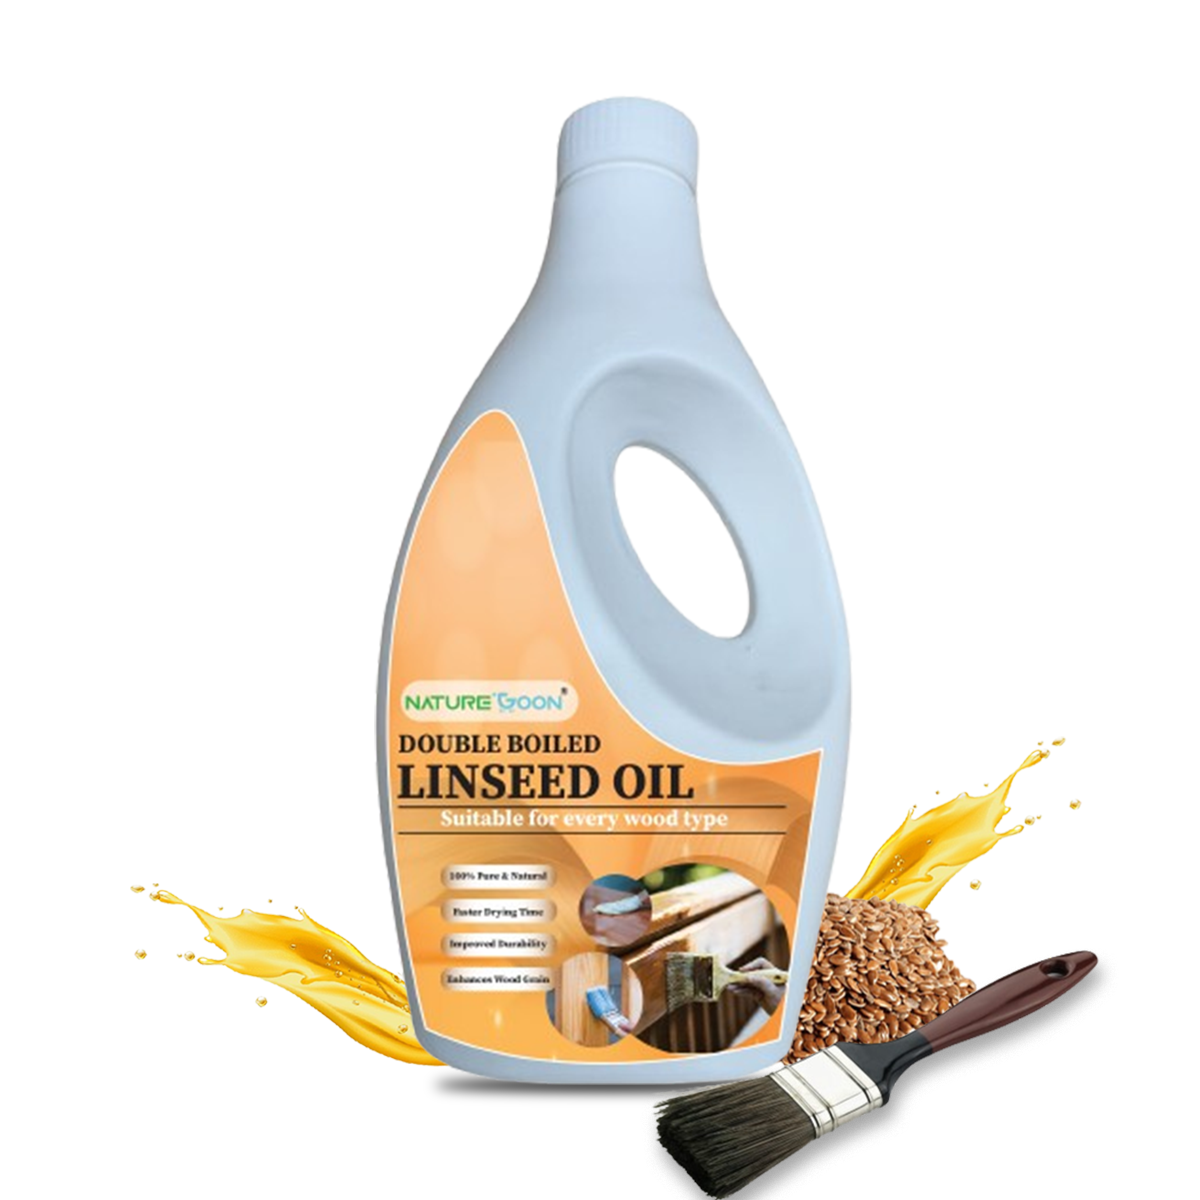 Boiled linseed oil, chemistry